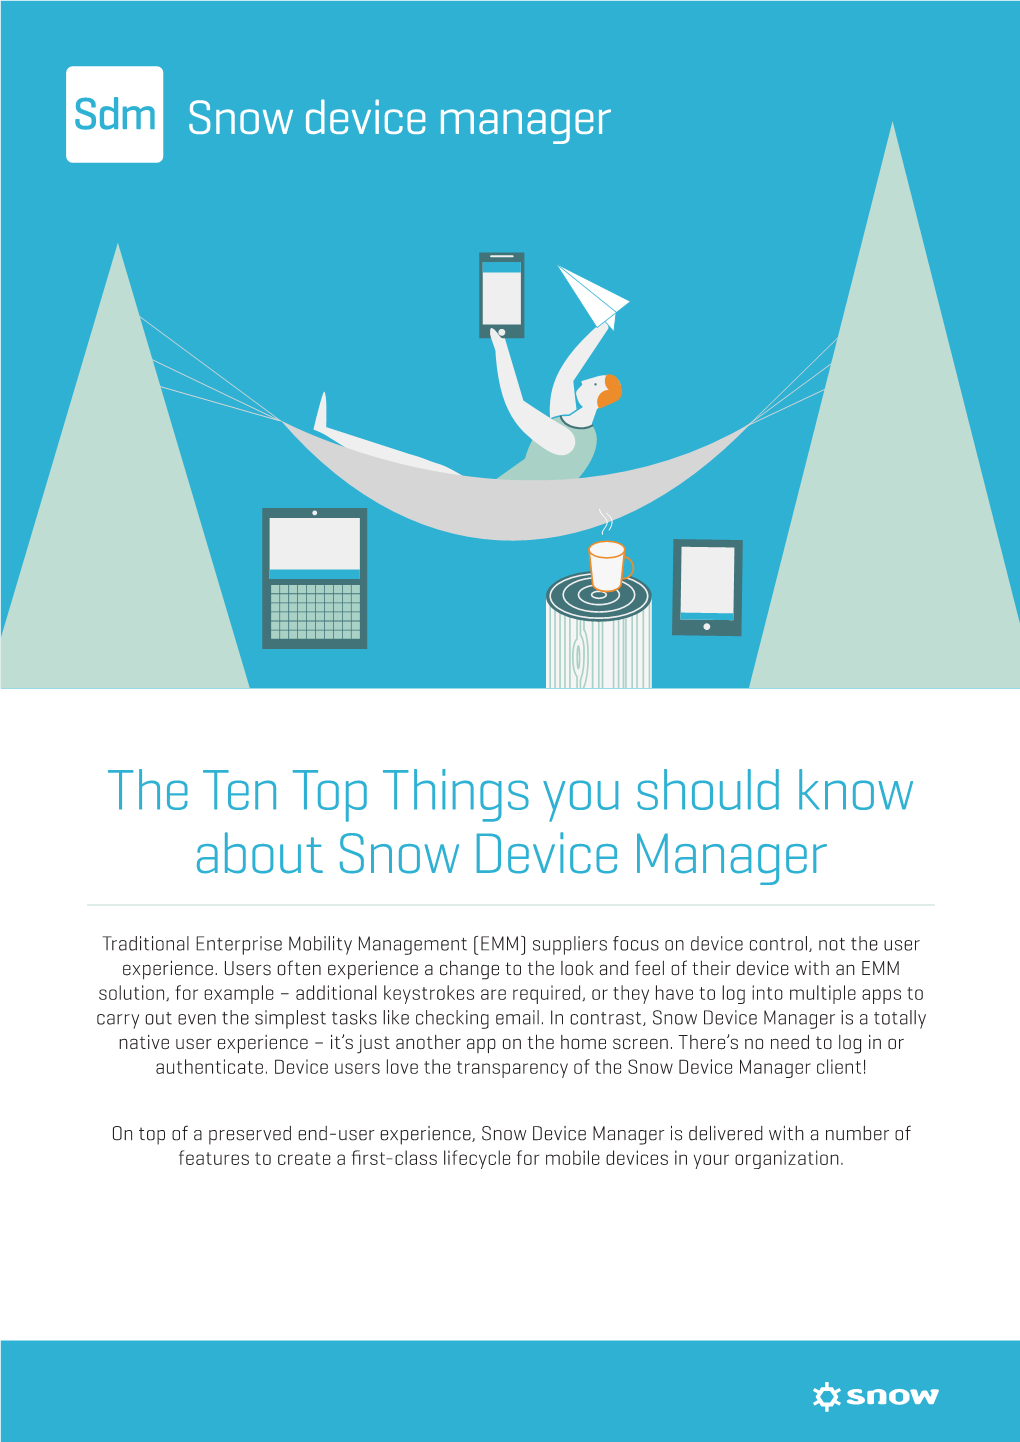 The Ten Top Things You Should Know About Snow Device Manager